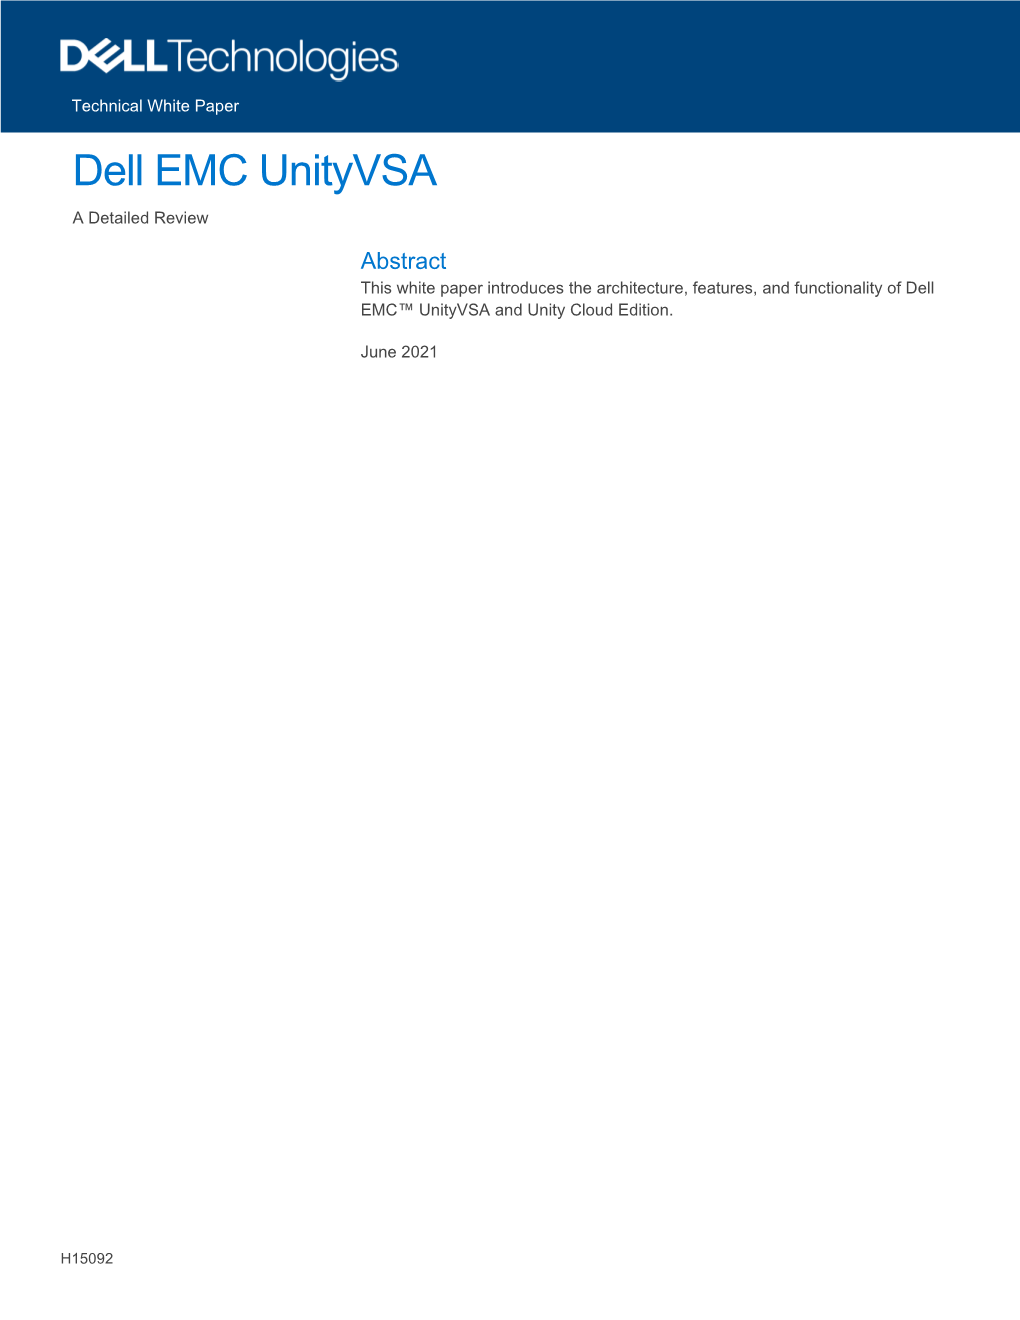 Dell EMC Unityvsa: a Detailed Review